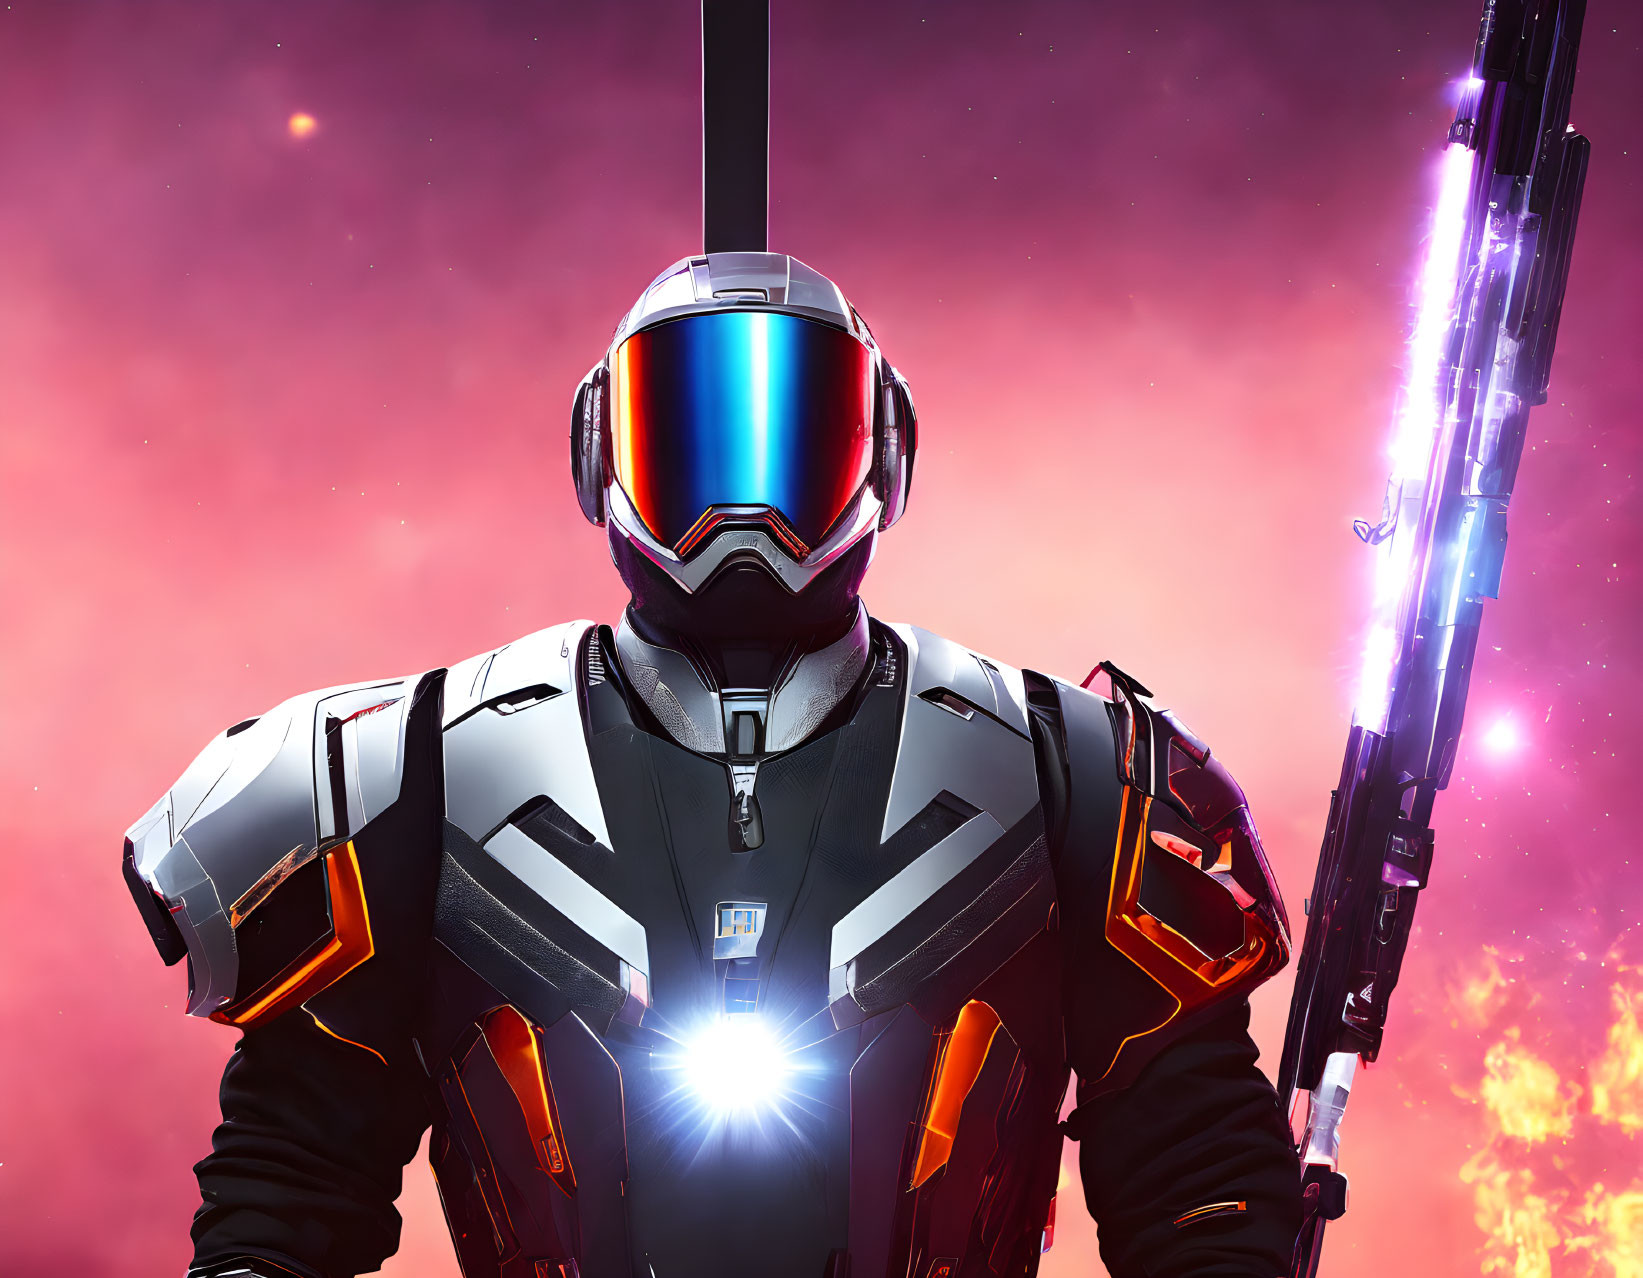 Futuristic soldier in white and black armor with glowing blue visor and neon-lit weapon on